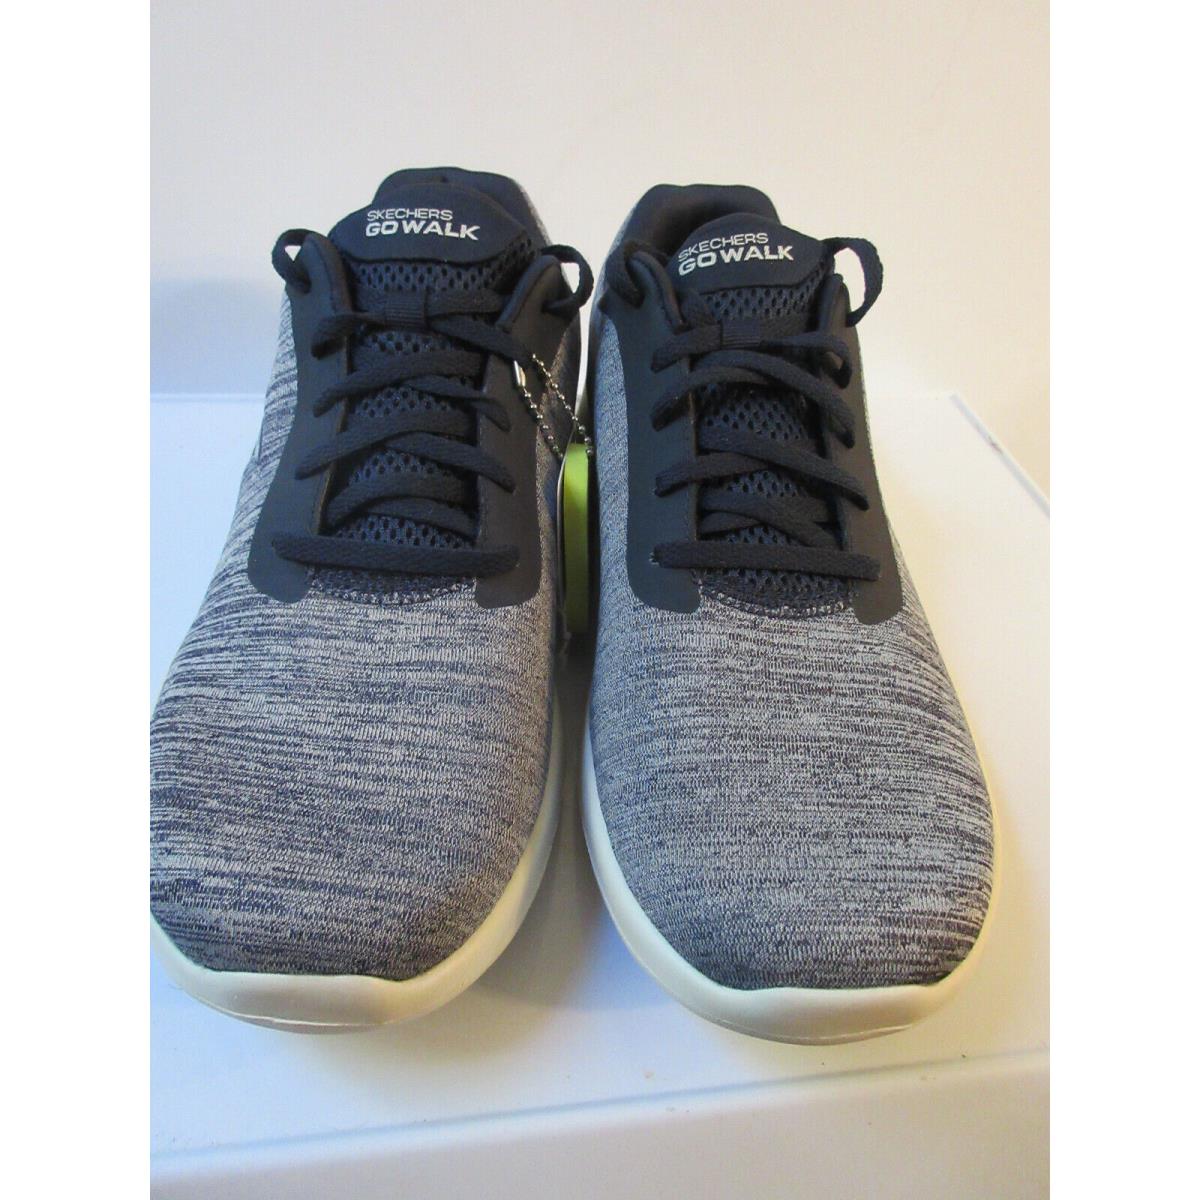 Skechers shoes Air Cooled GoGA Mat - Gray 7